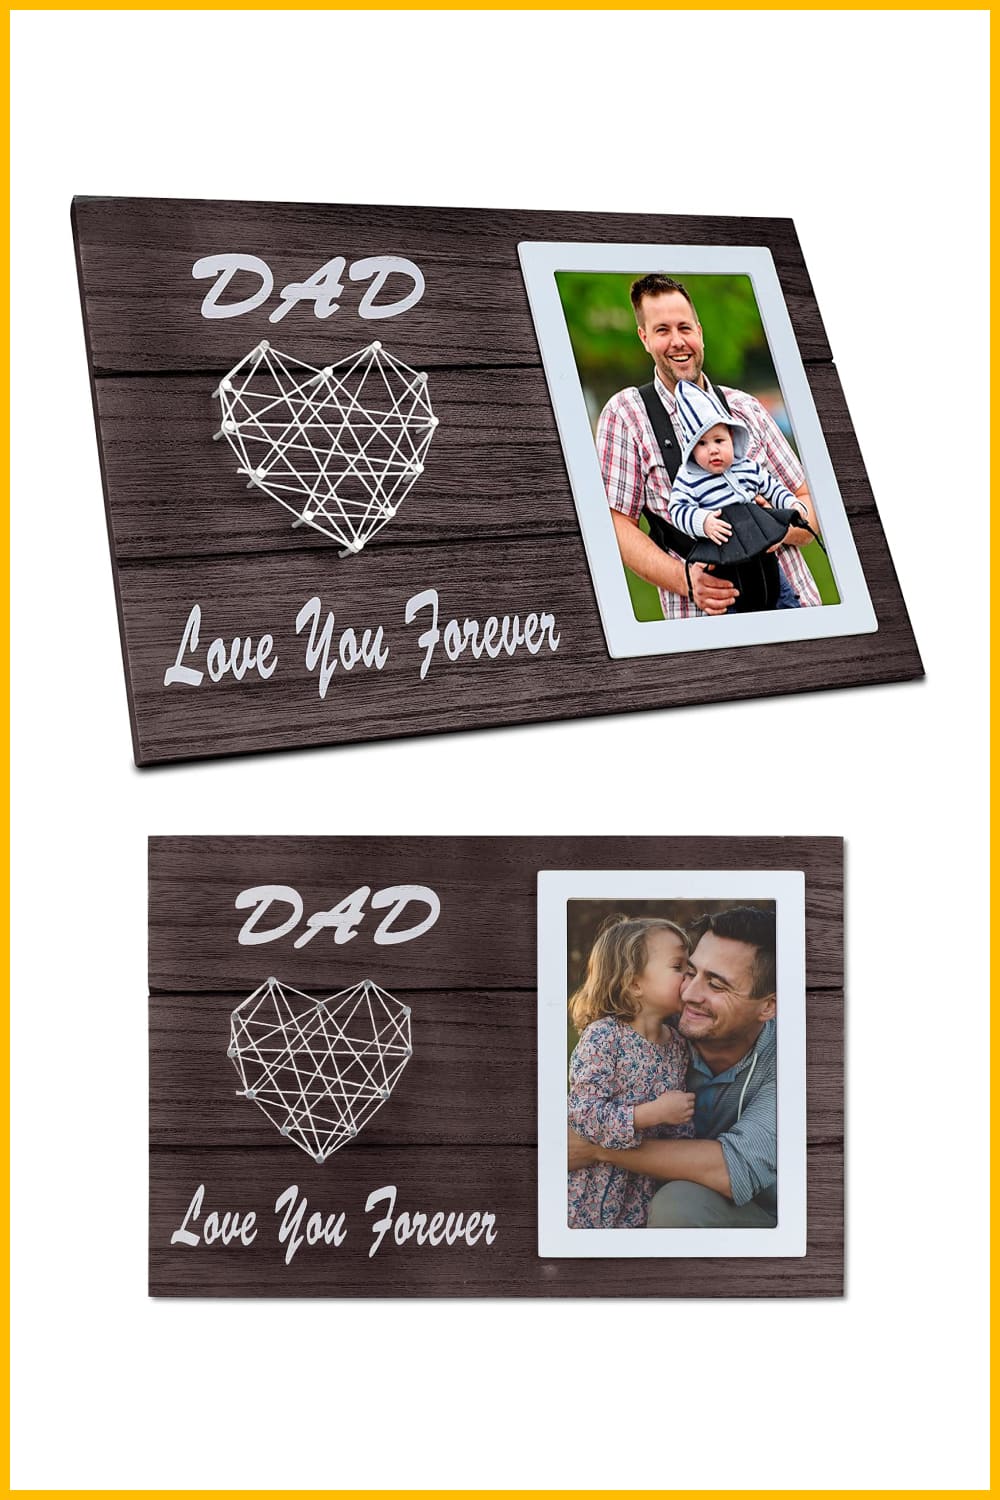 Photo frame collage with photos of fathers with children.